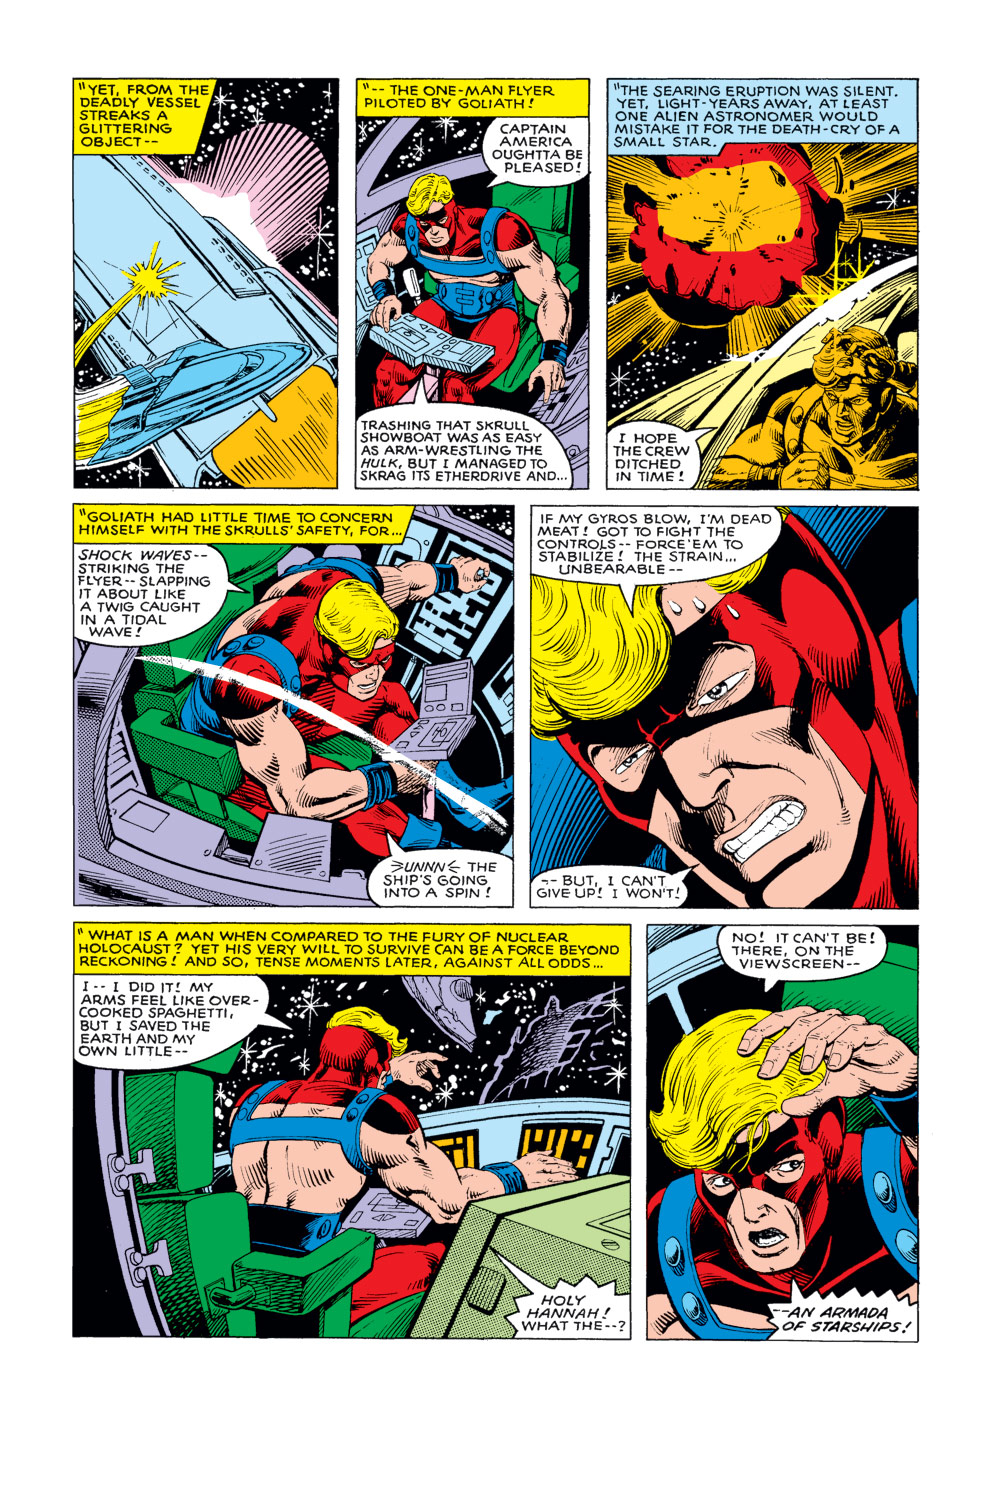 What If? (1977) issue 20 - The Avengers fought the Kree-Skrull war without Rick Jones - Page 15